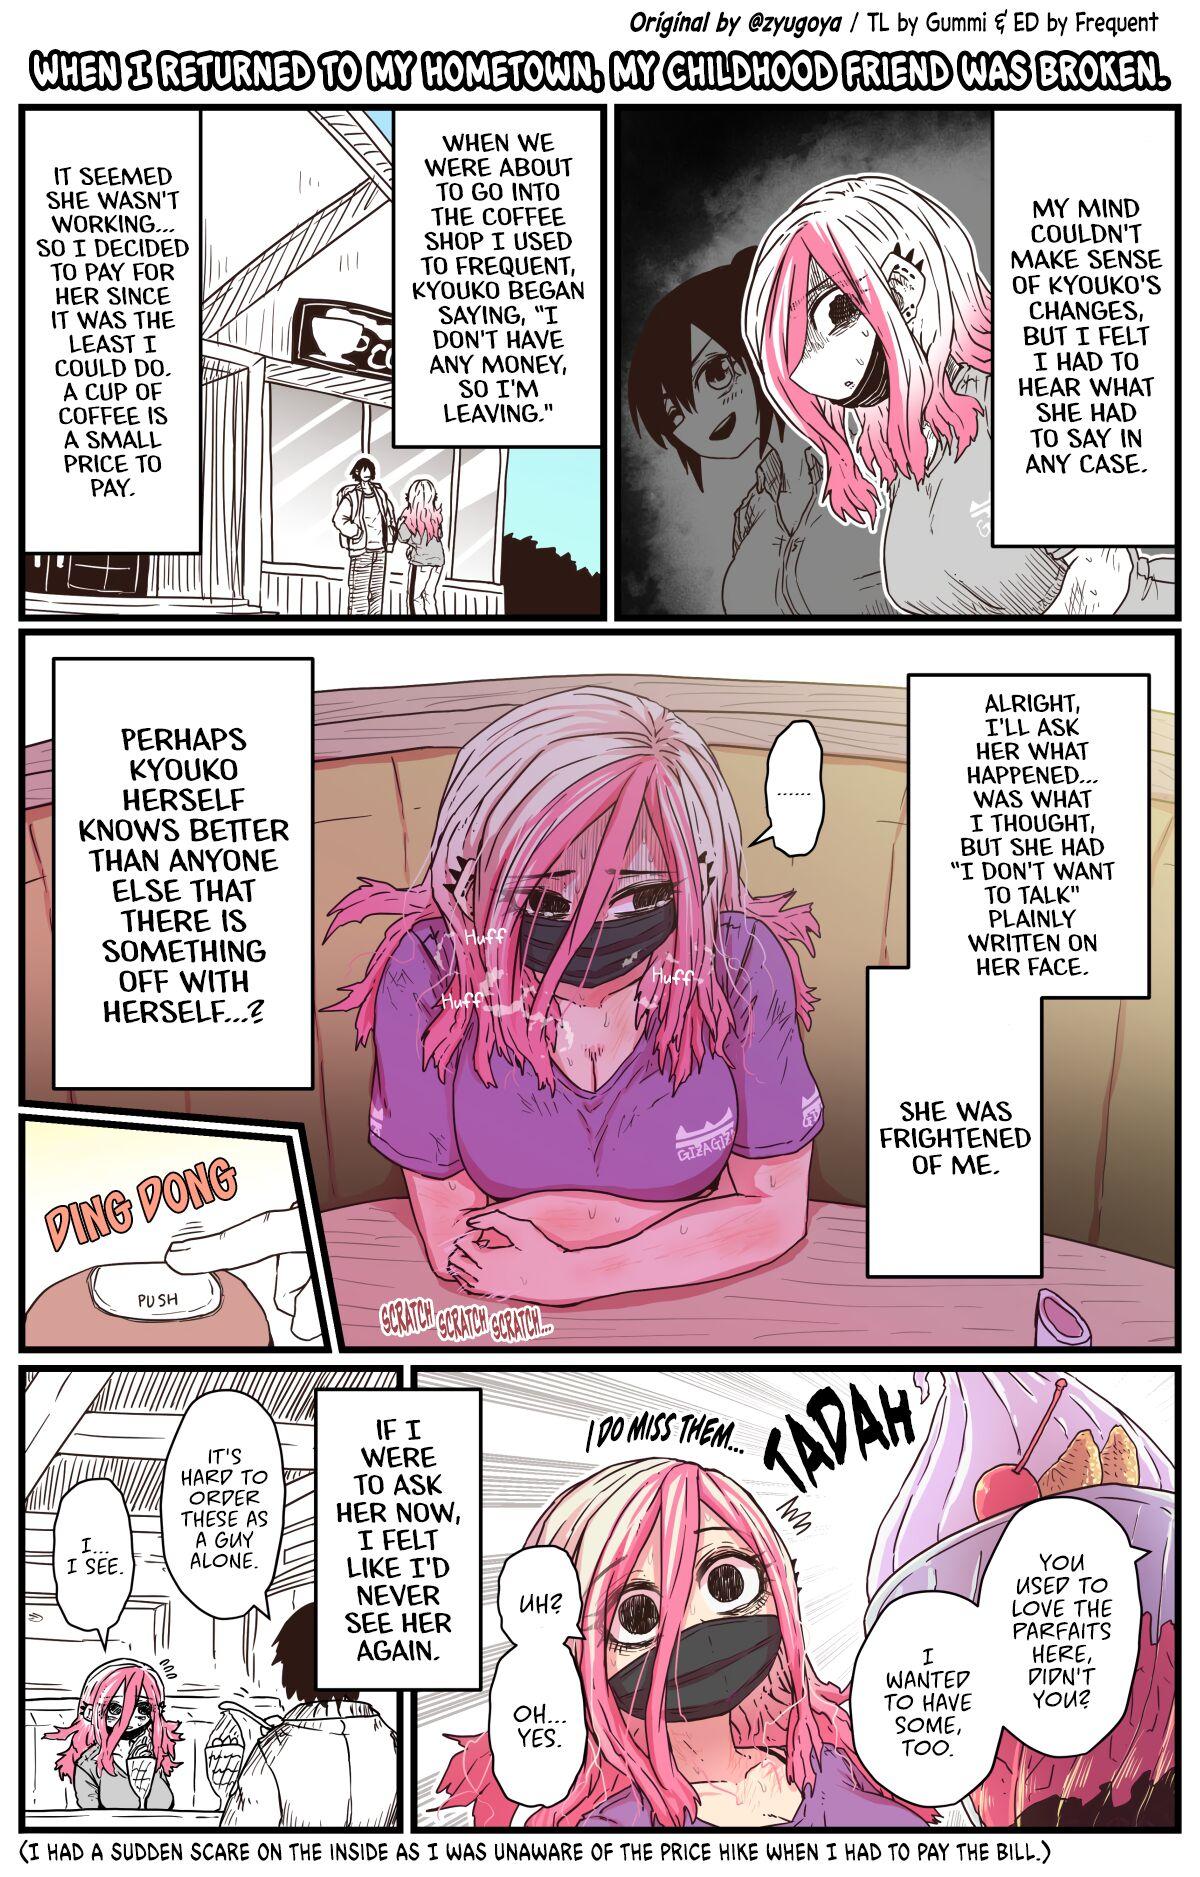 Clitoris When I Returned to My Hometown, My Childhood Friend was Broken - Original Long Hair - Page 2